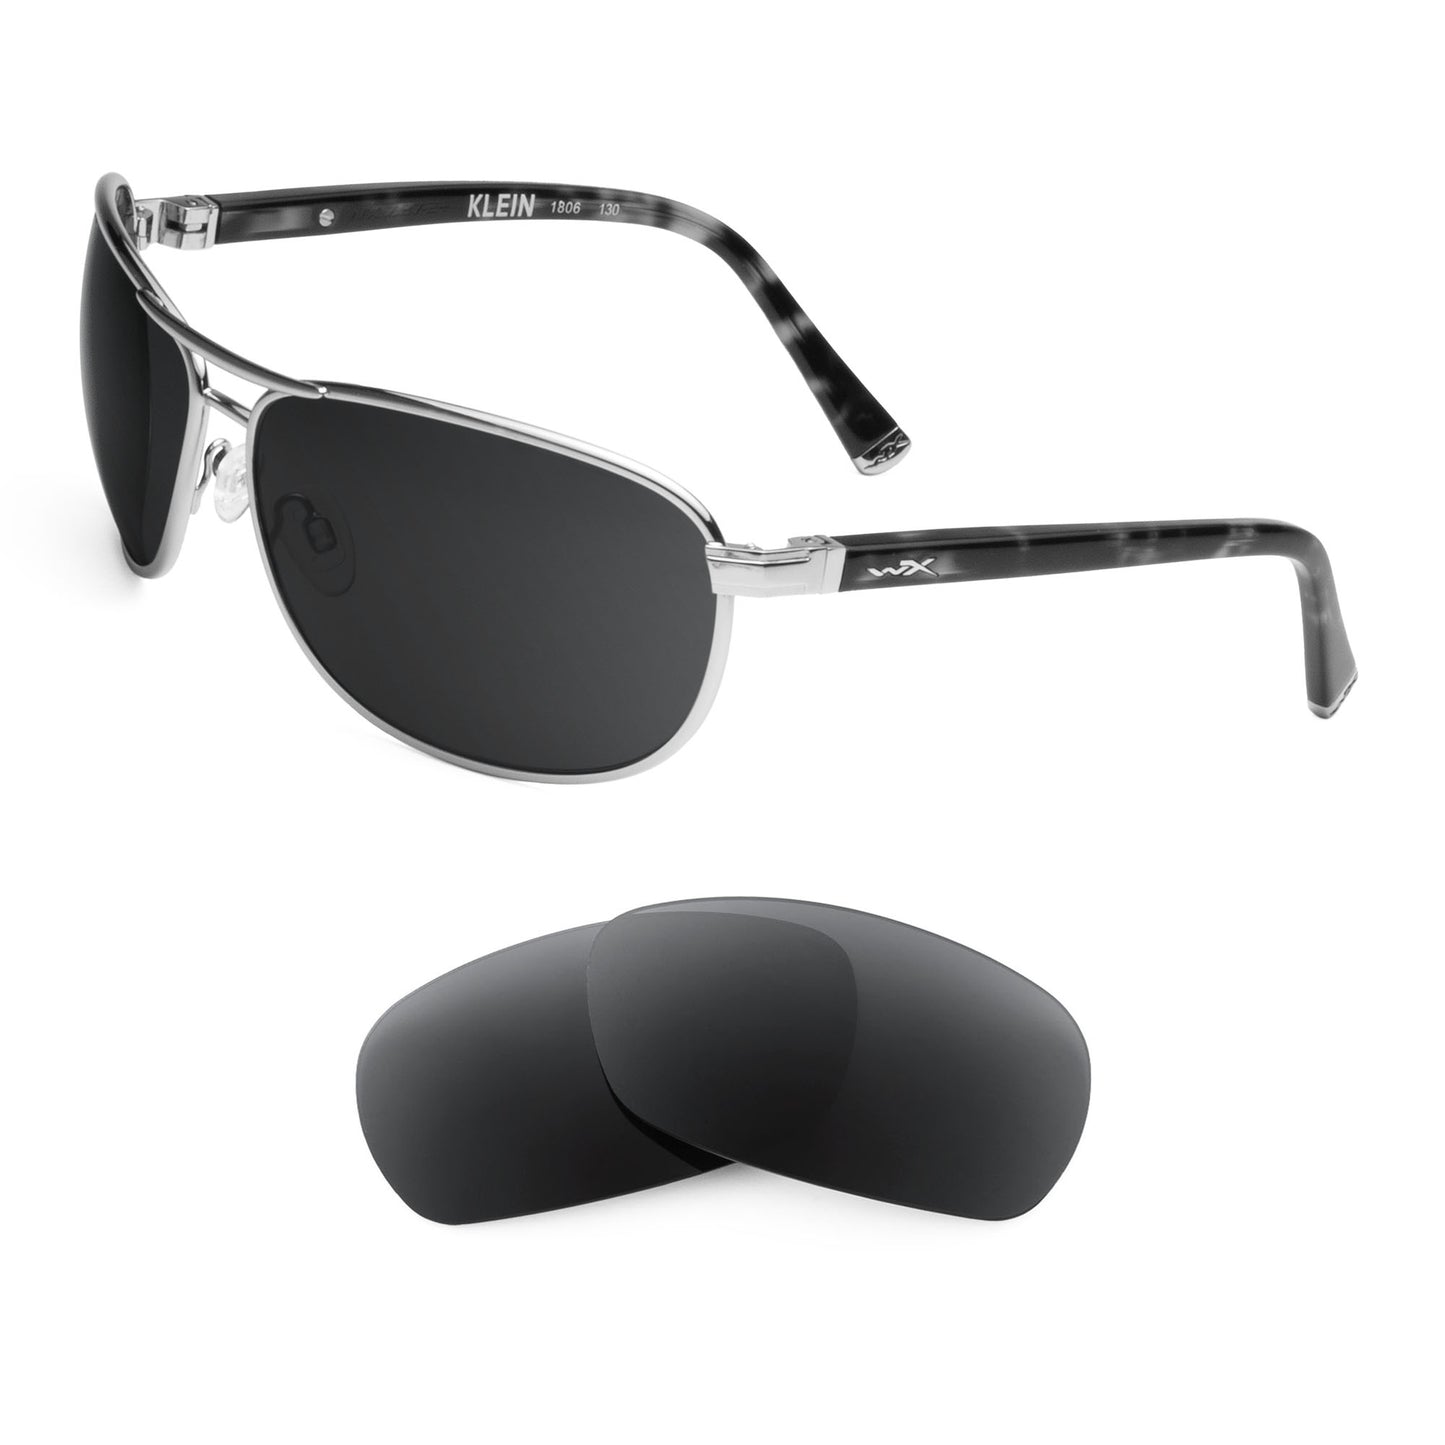 Wiley X Klein sunglasses with replacement lenses